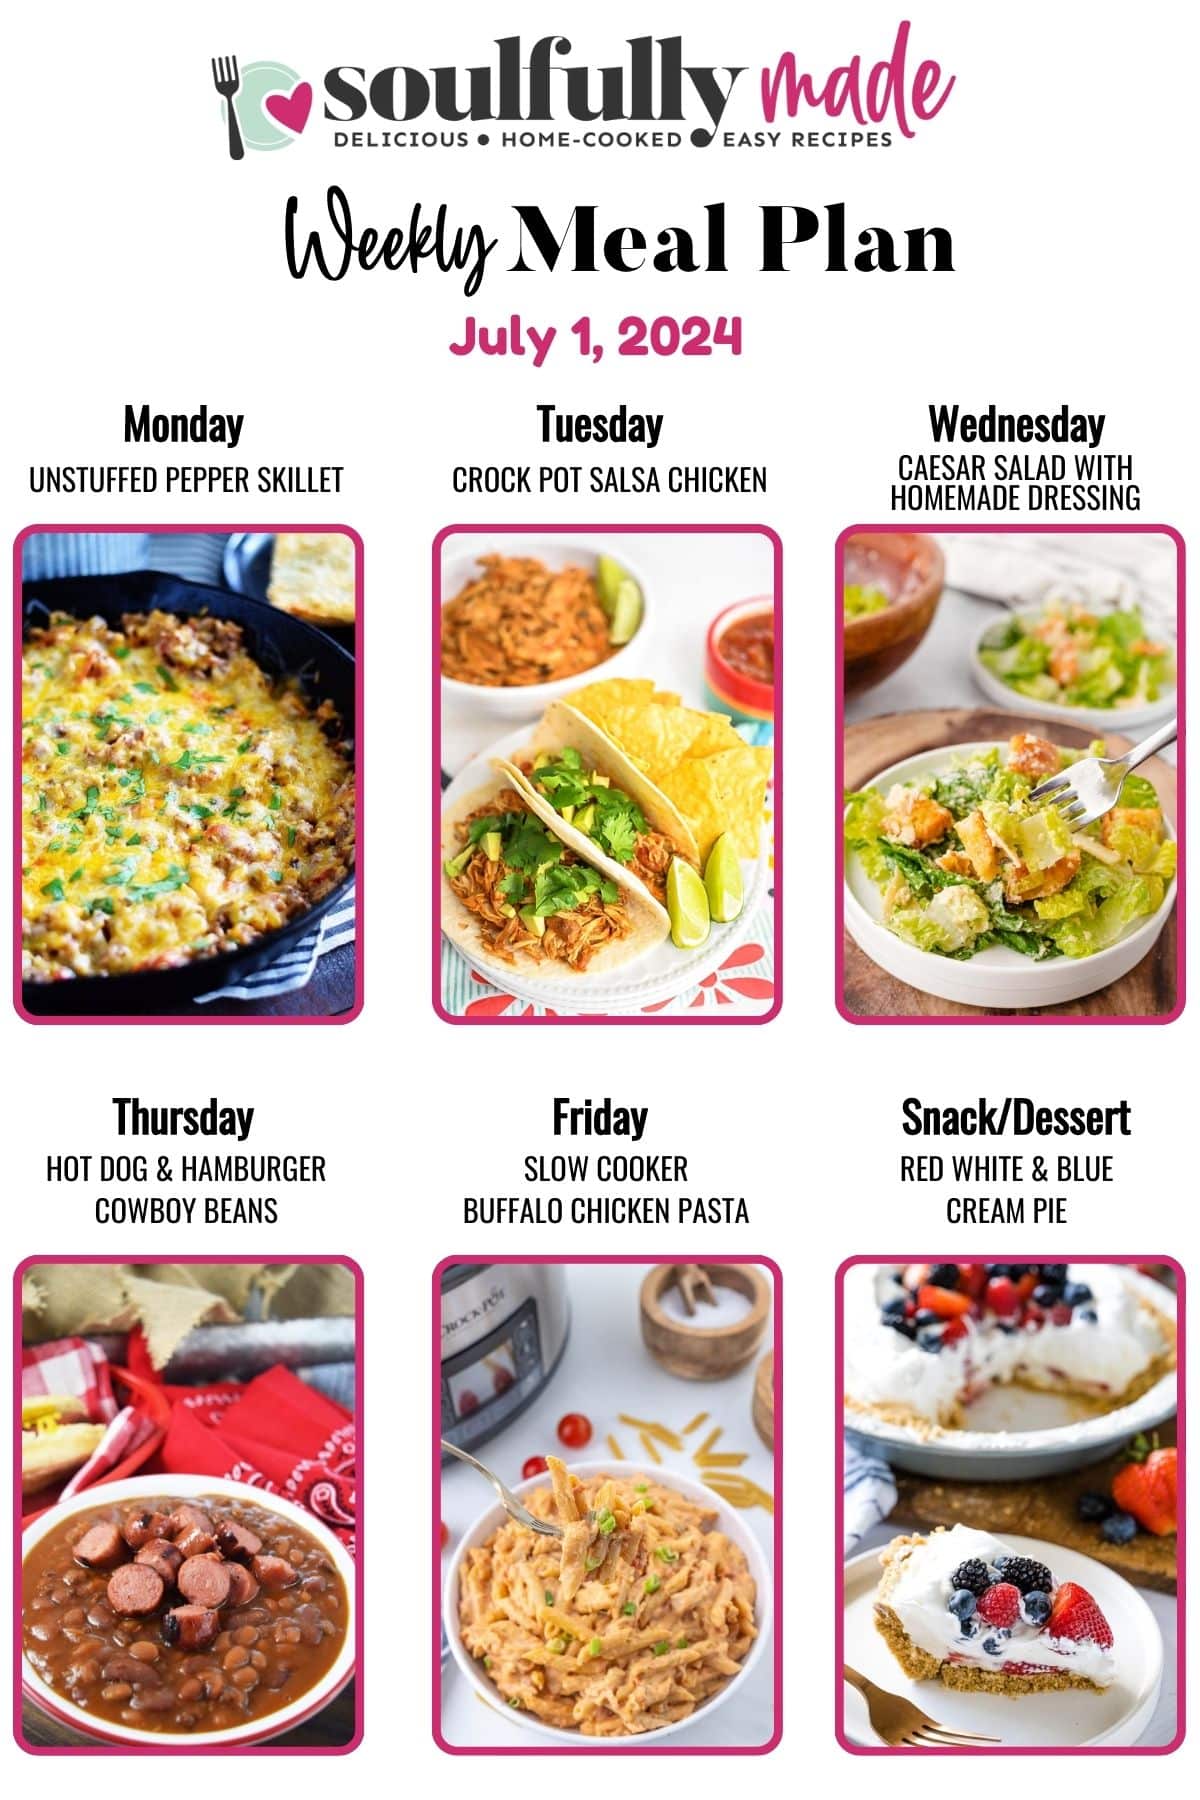 Weekly meal plan collage image for July 1, 2024 including unstuffed pepper skillet, salsa chicken, caesar salad, cowboy beans with ground beef and hot dogs, crock pot buffalo chicken pasta, and red, white & blue cream pie.